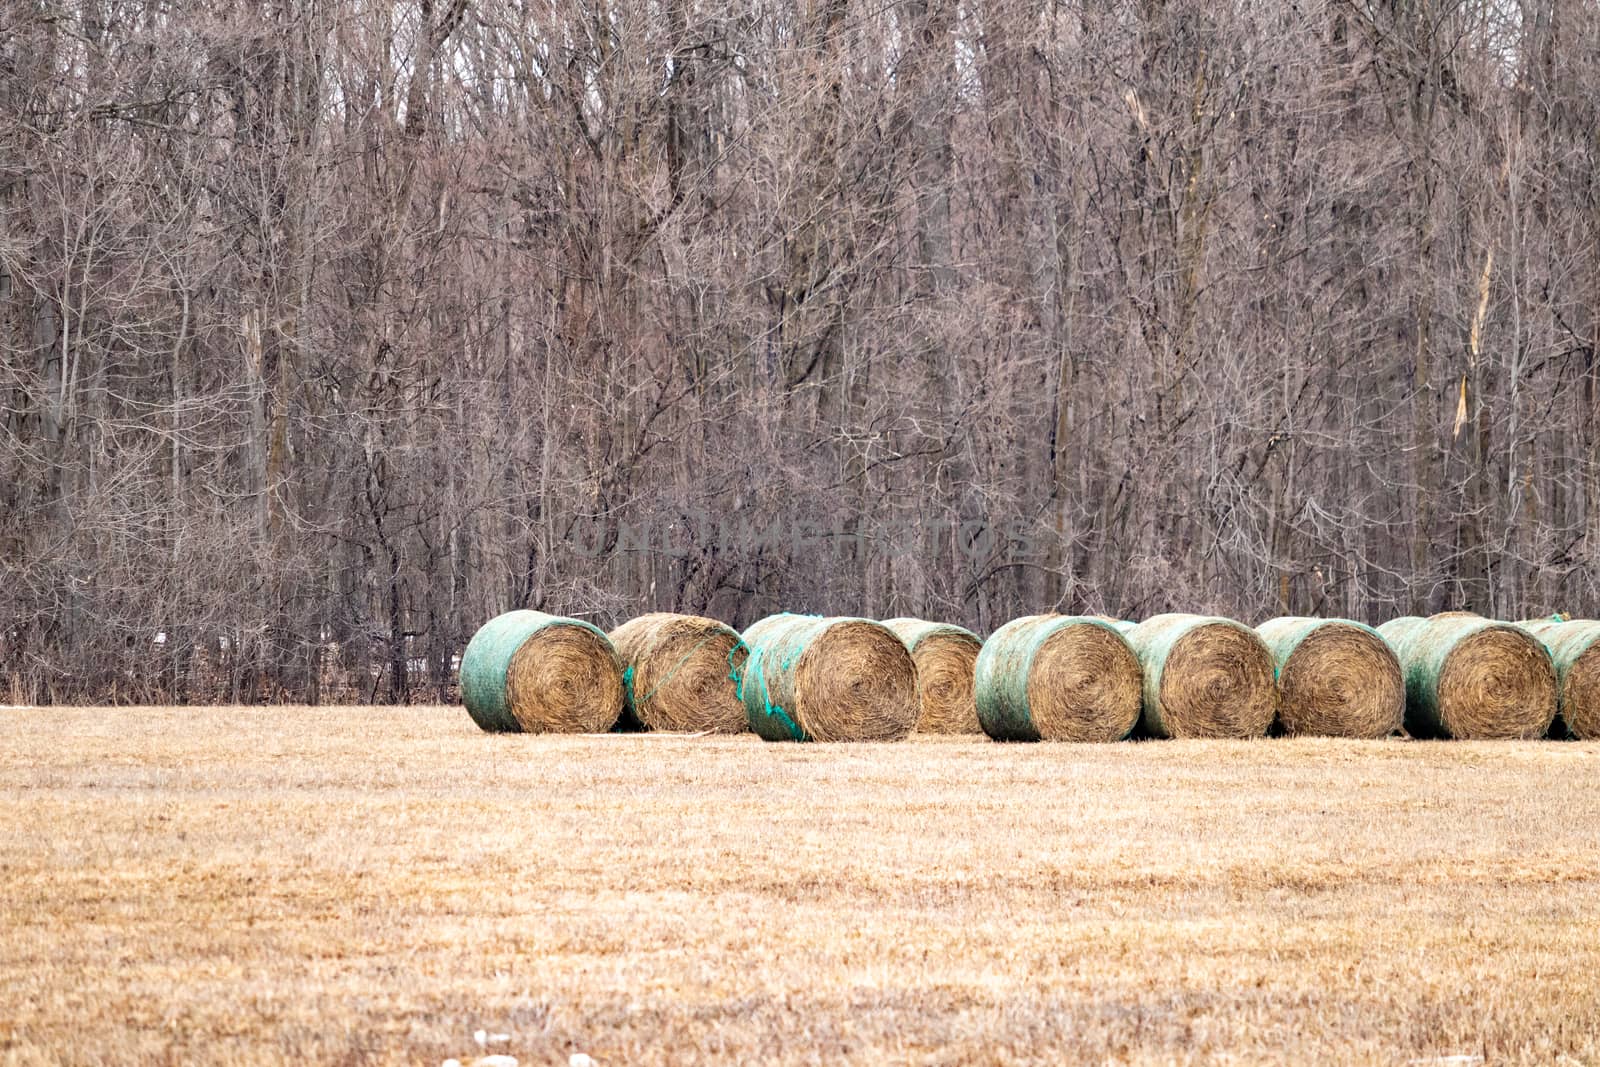 Wrapped Rolls of Hay in a Field by colintemple